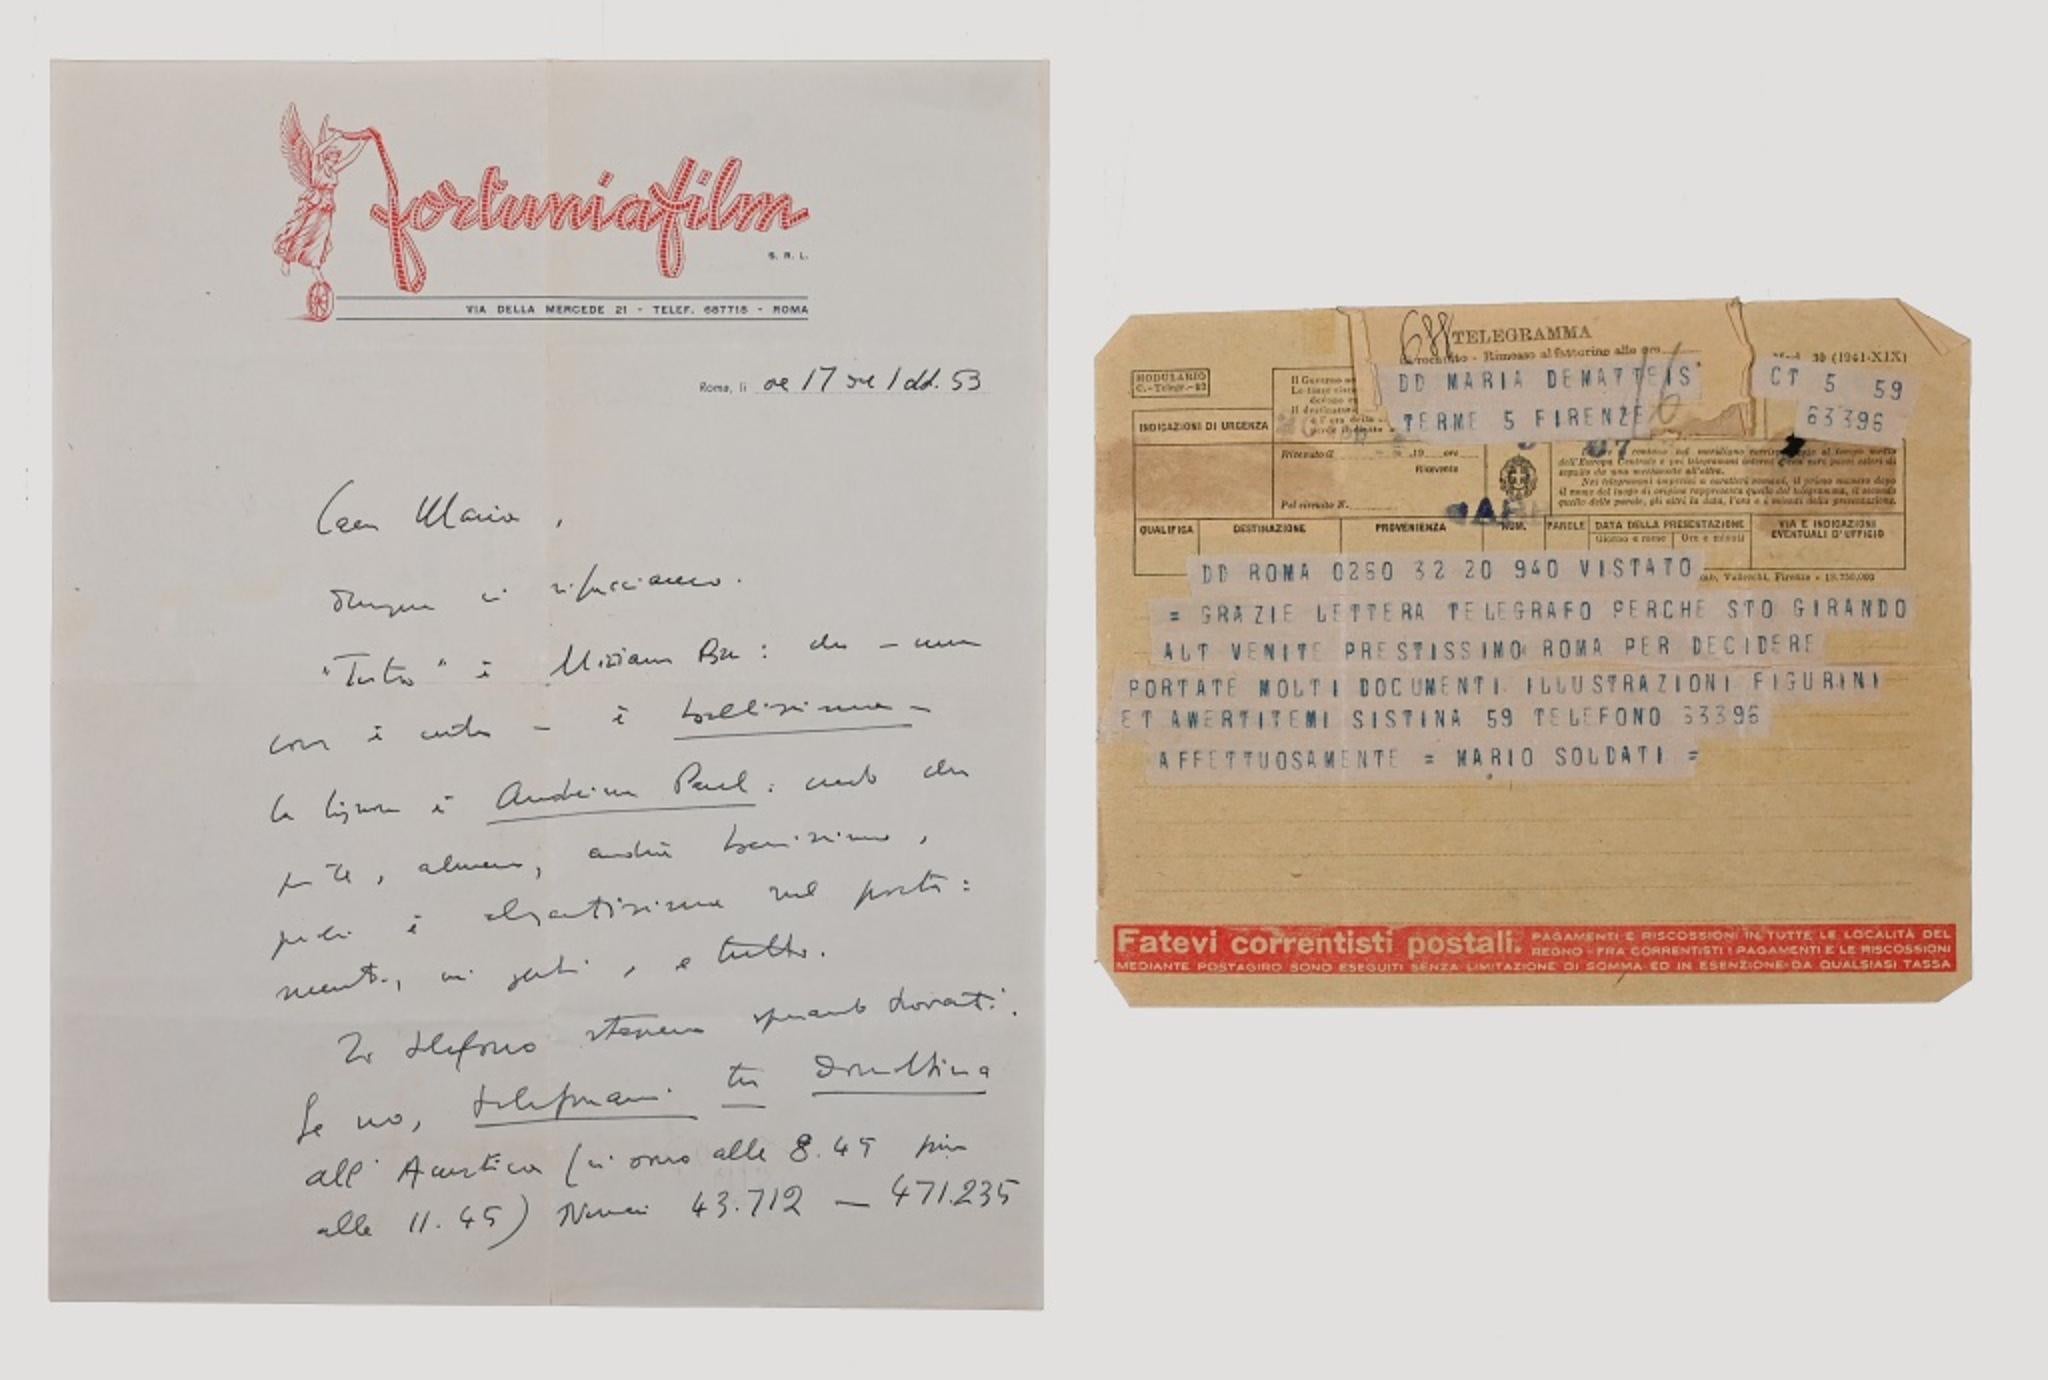 This lot is composed of :

a Telegram by Mario Soldati to Maria De Matteis. Written In Italian. Rome, April 20th, 1943 (from the postmark on the back);
a Autograph Letter Signed by M. Soldati to Maria De Matteis. Rome, October 1st 1953. In Italian.